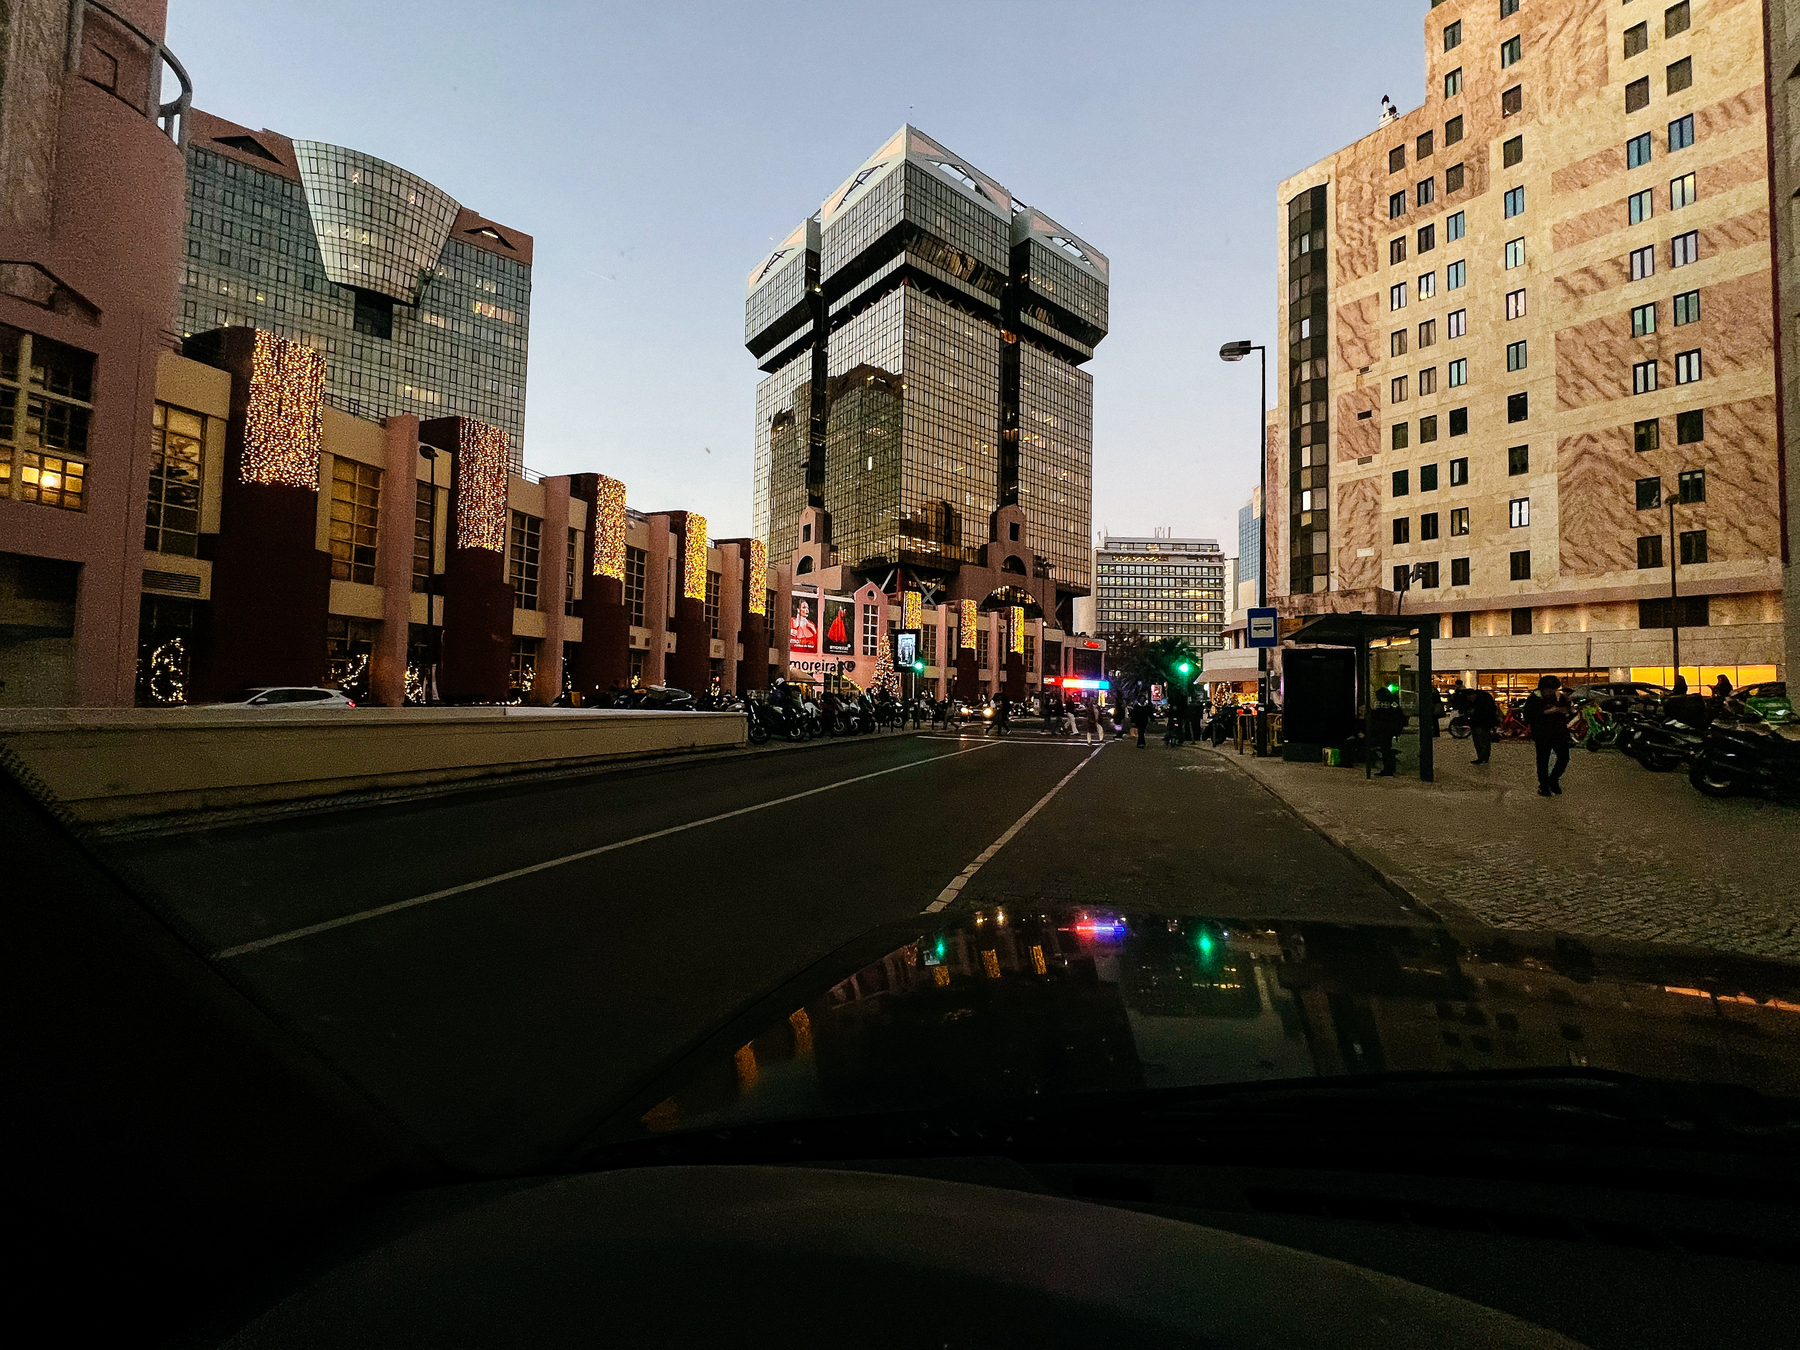 A city street view at dusk with modern buildings, some decorated with lights, as seen from a car&rsquo;s perspective. There are pedestrians, motorcycles parked on the sidewalk, and signs of urban activity.